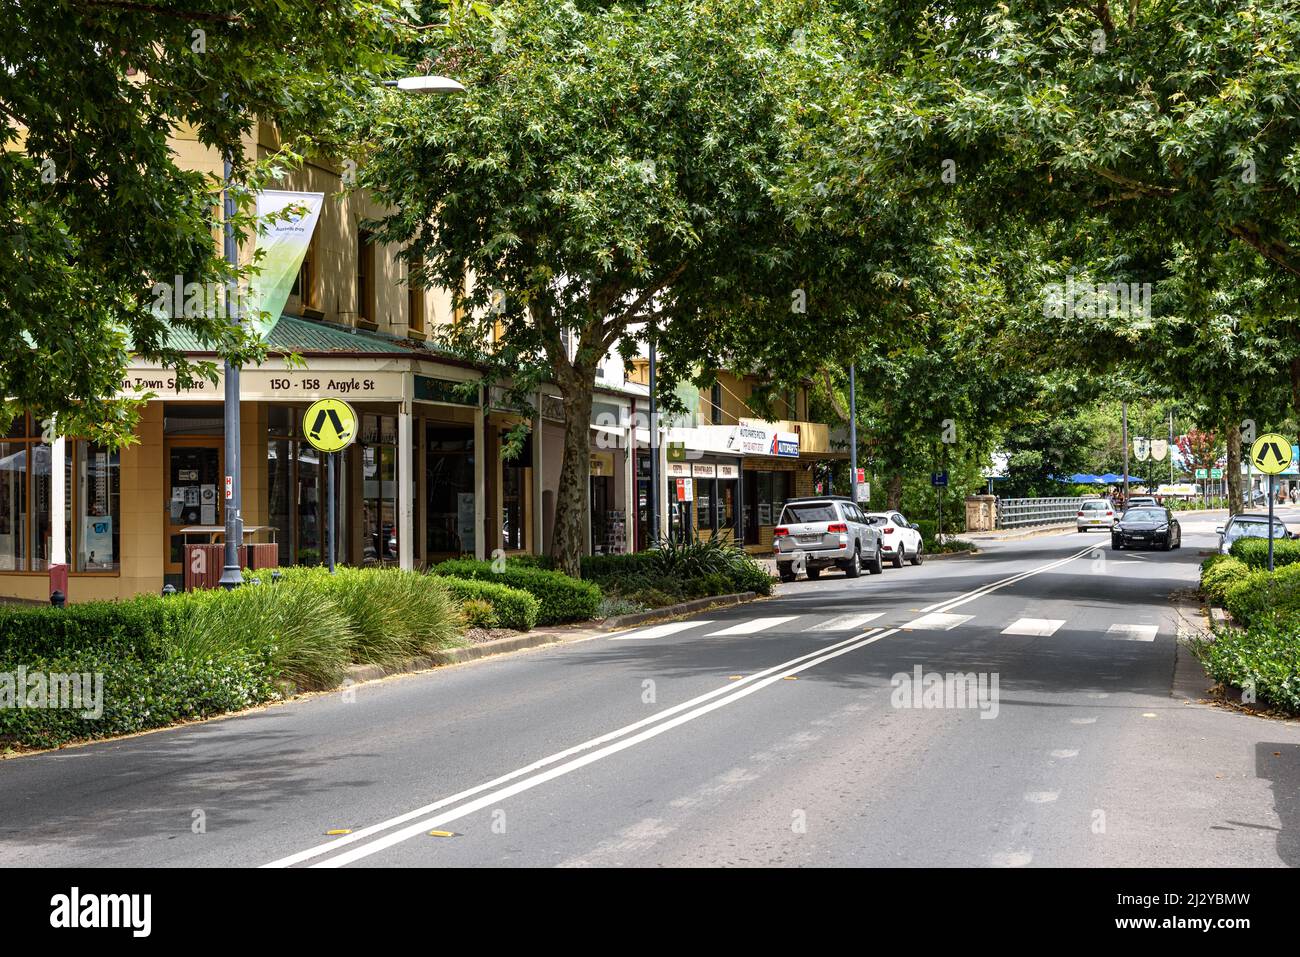 Looking down Argyle Street, the main street of Picton, New South Wales, on a summer day Stock Photo